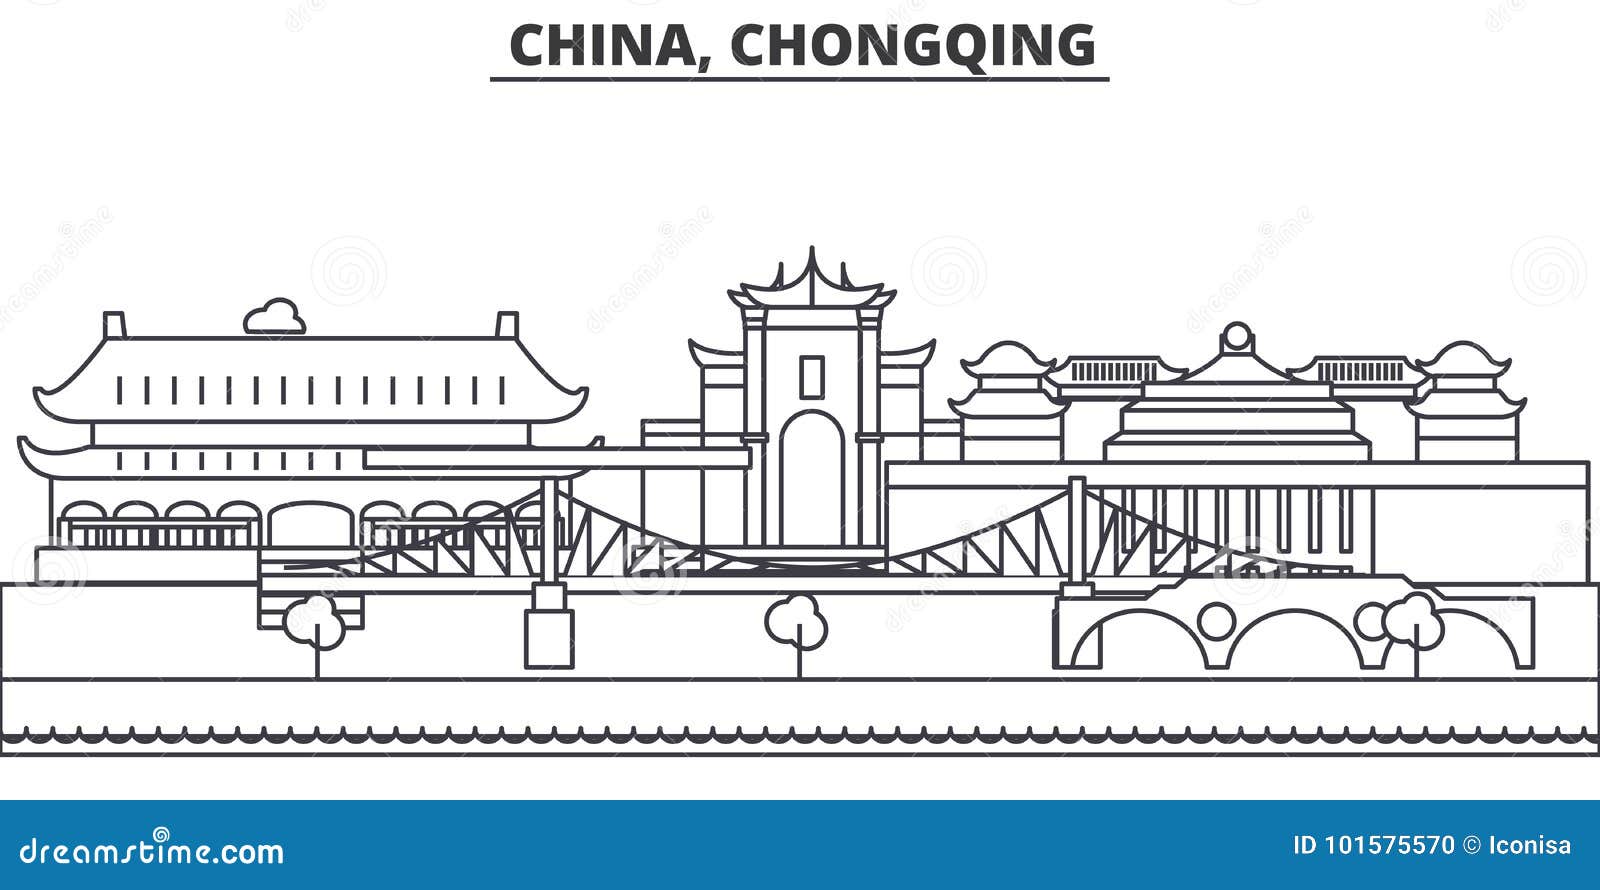 china, chongqing architecture line skyline . linear  cityscape with famous landmarks, city sights